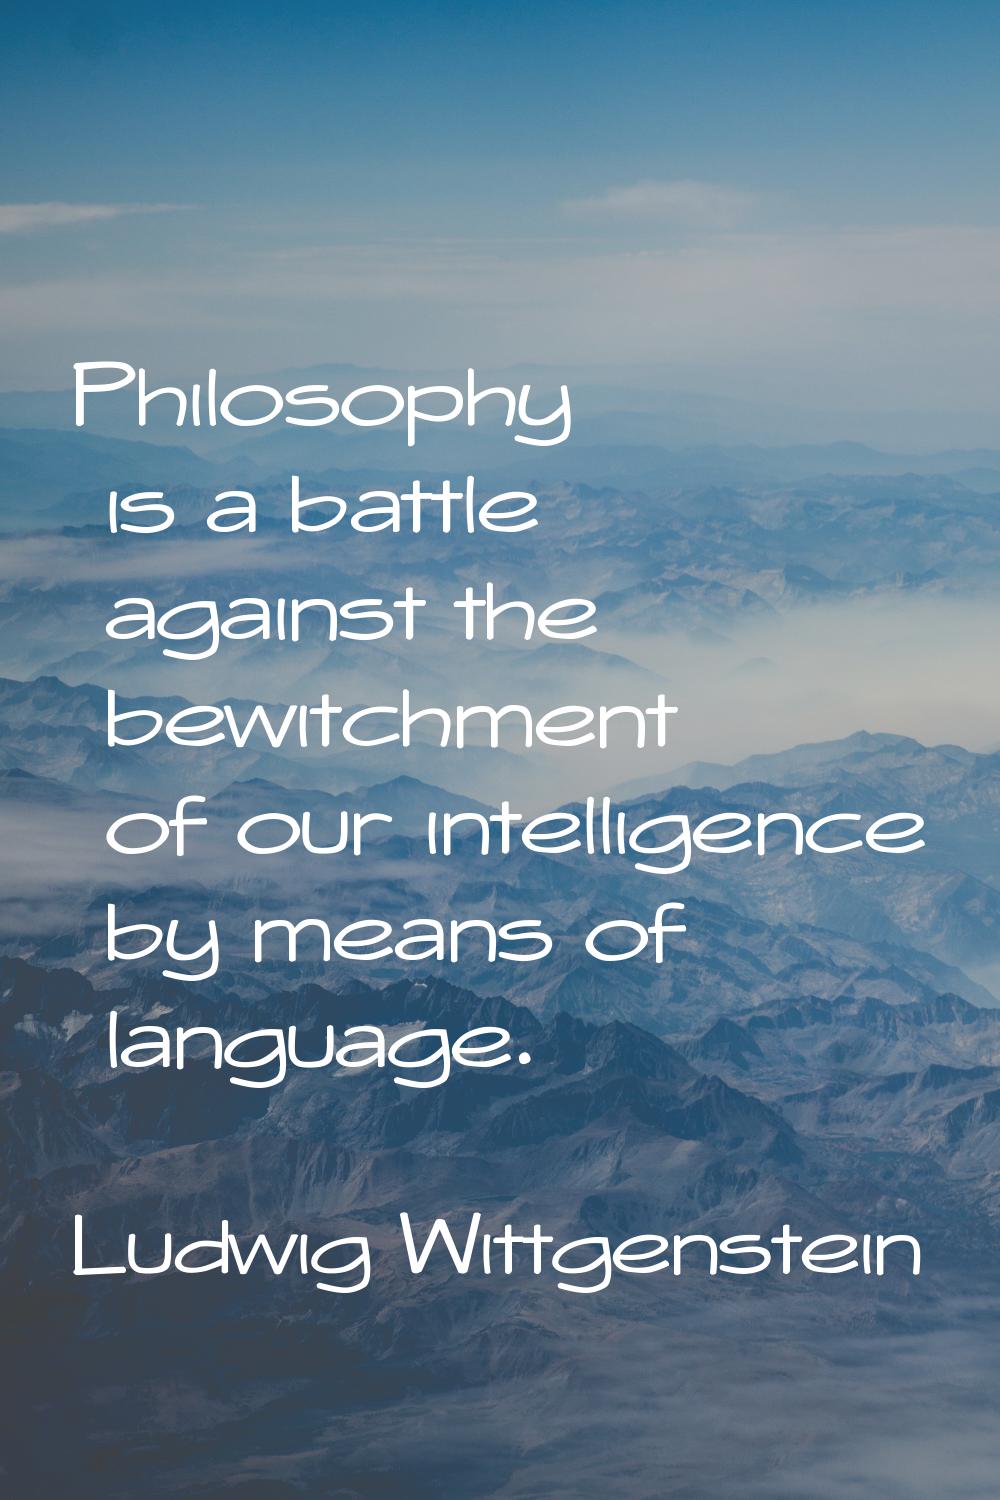 Philosophy is a battle against the bewitchment of our intelligence by means of language.